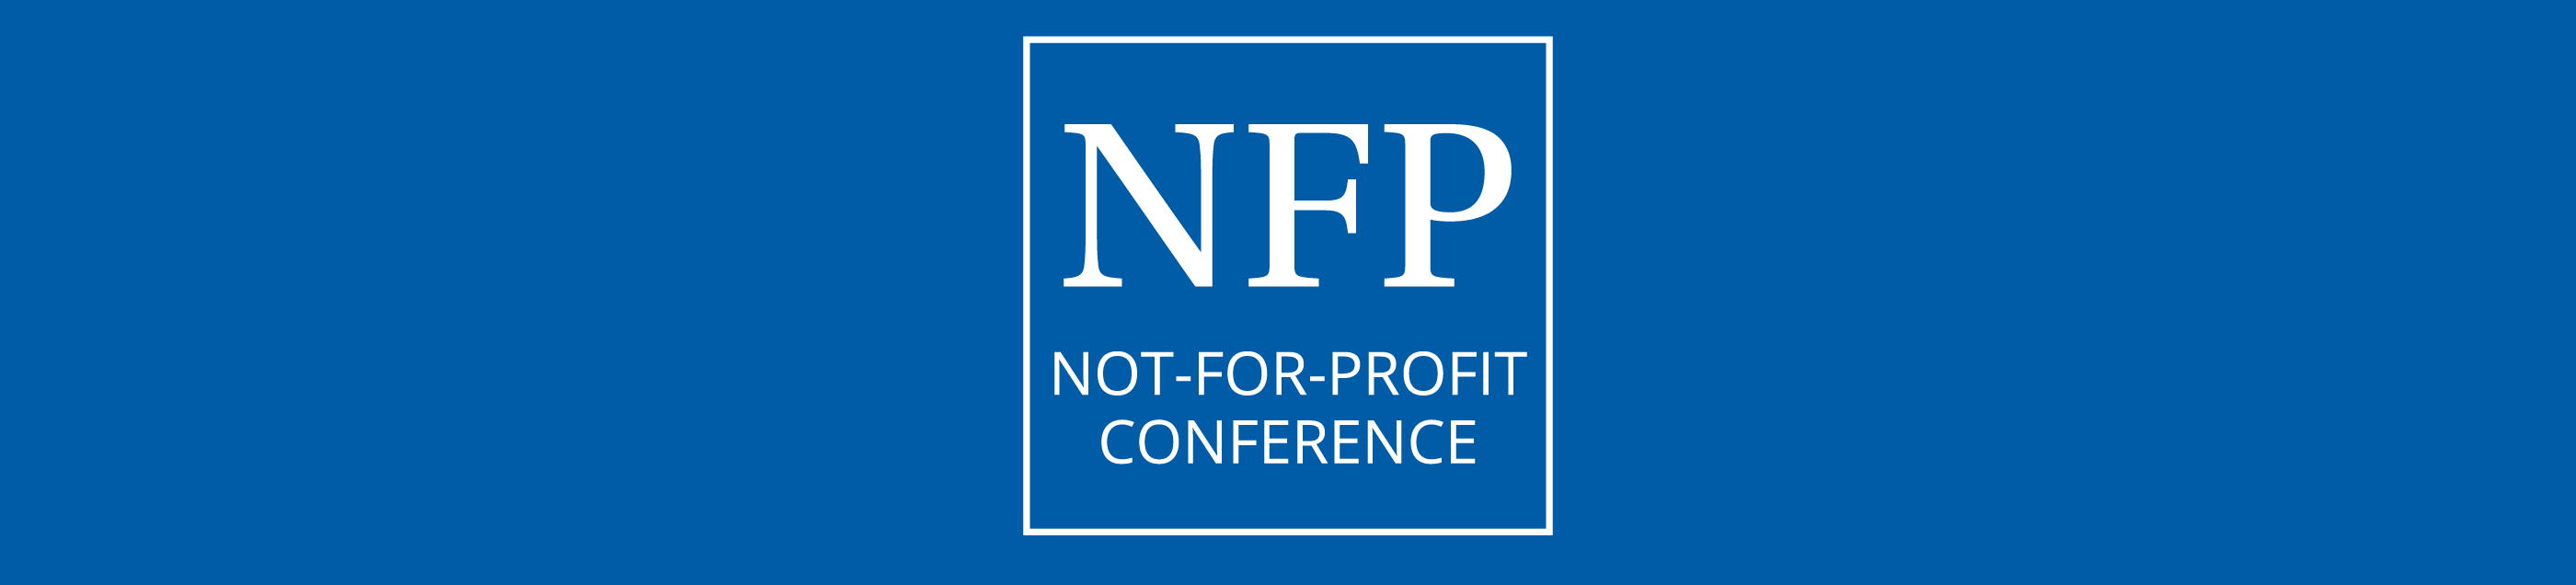 Not-for-Profit Conference